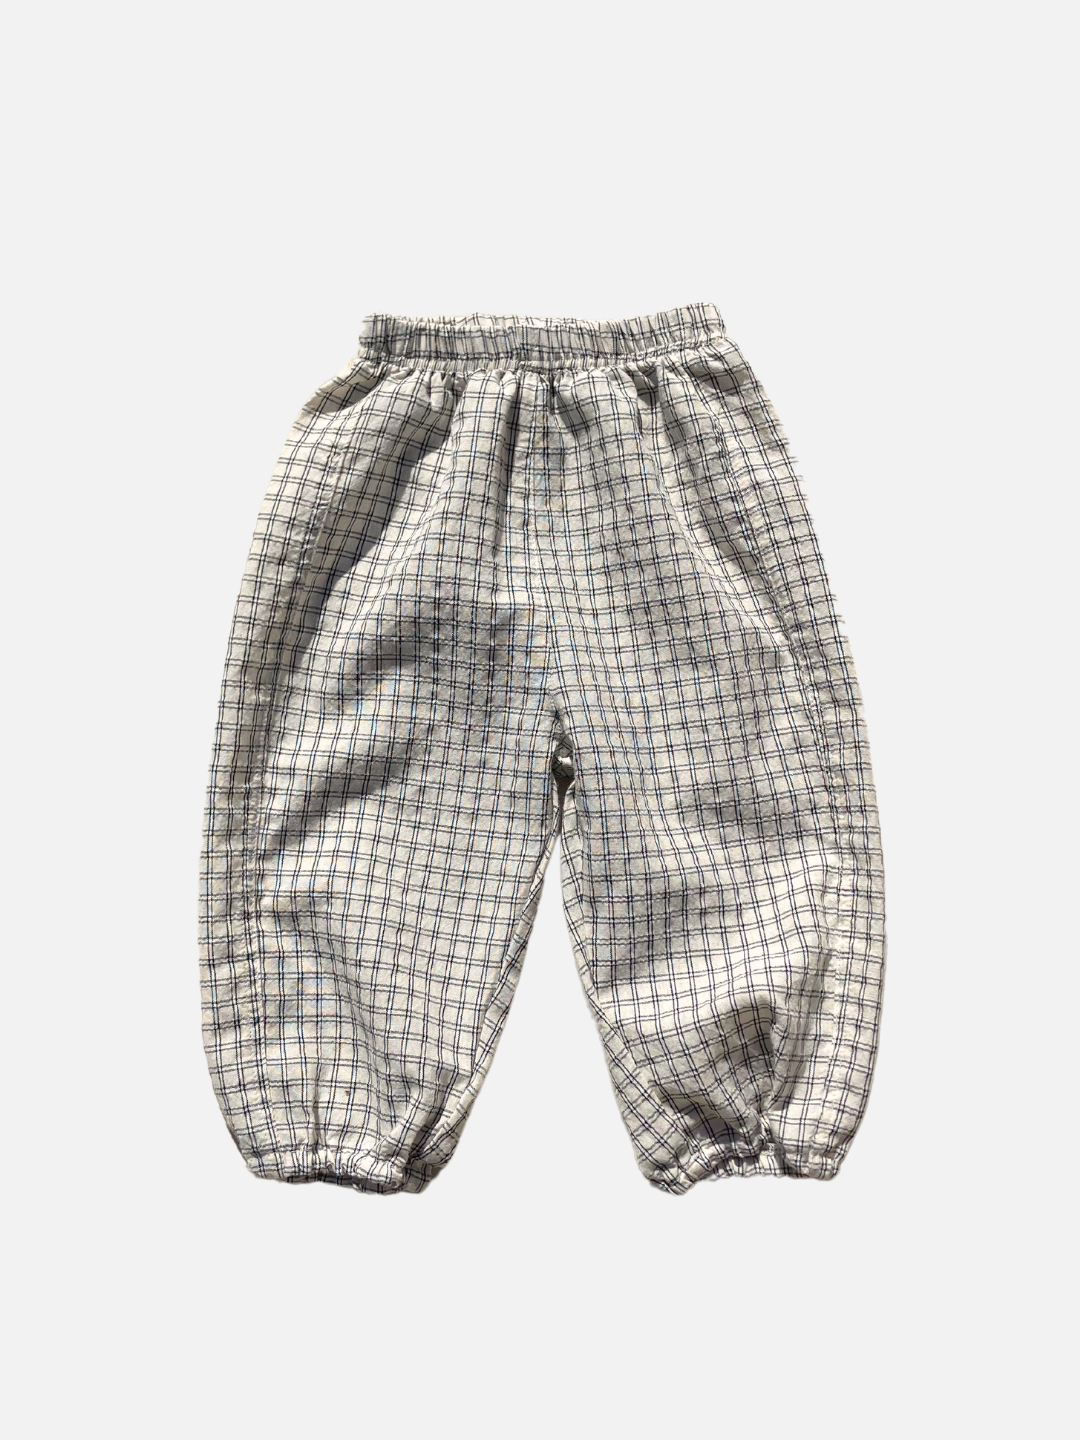 Front view of the kids' Grid Check Pull on Pant. Cream fabric with light black grid print.